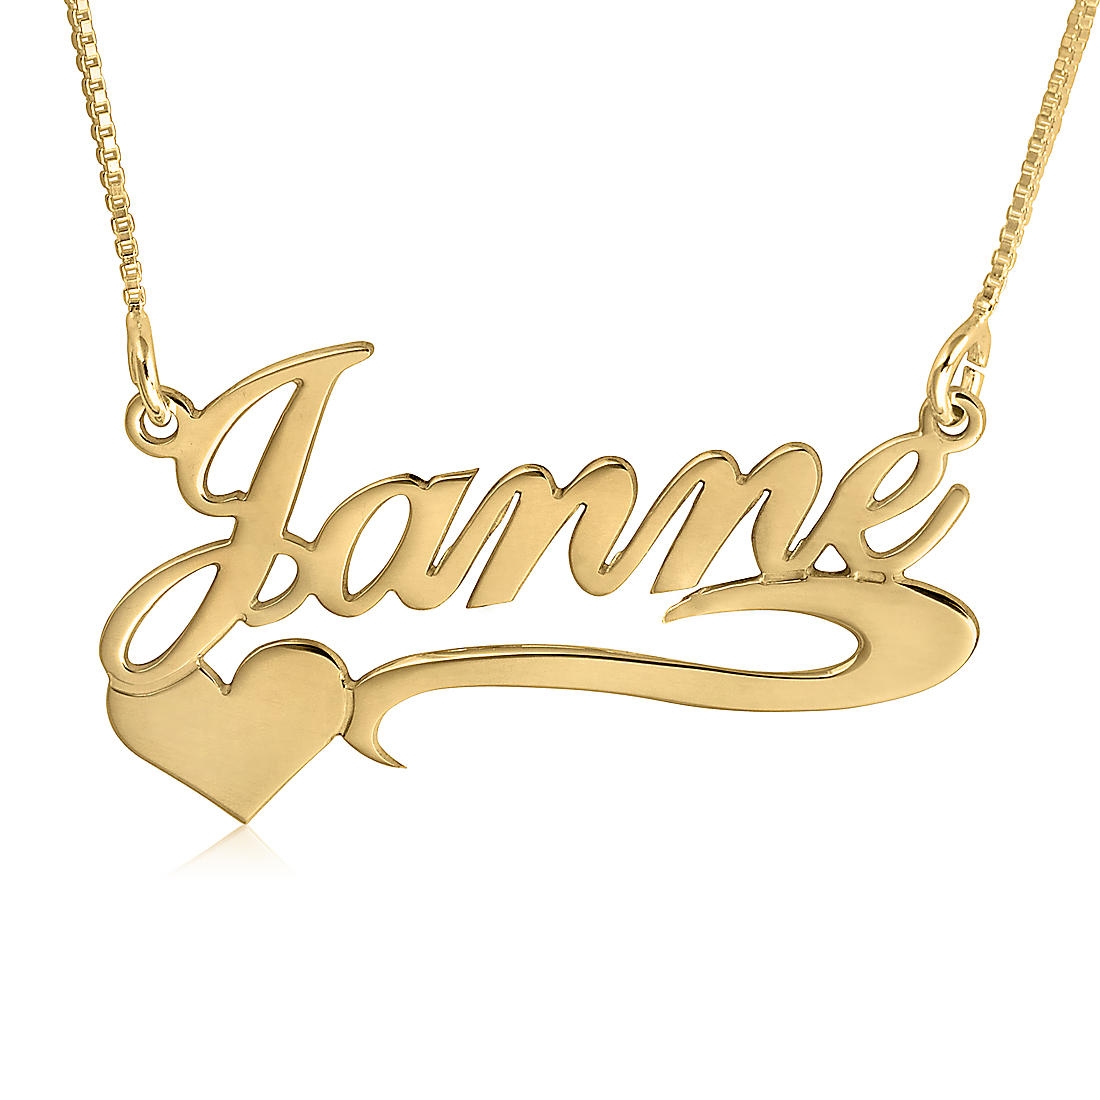 Heart Swoosh Name Necklace, 24k Gold Plated - 1